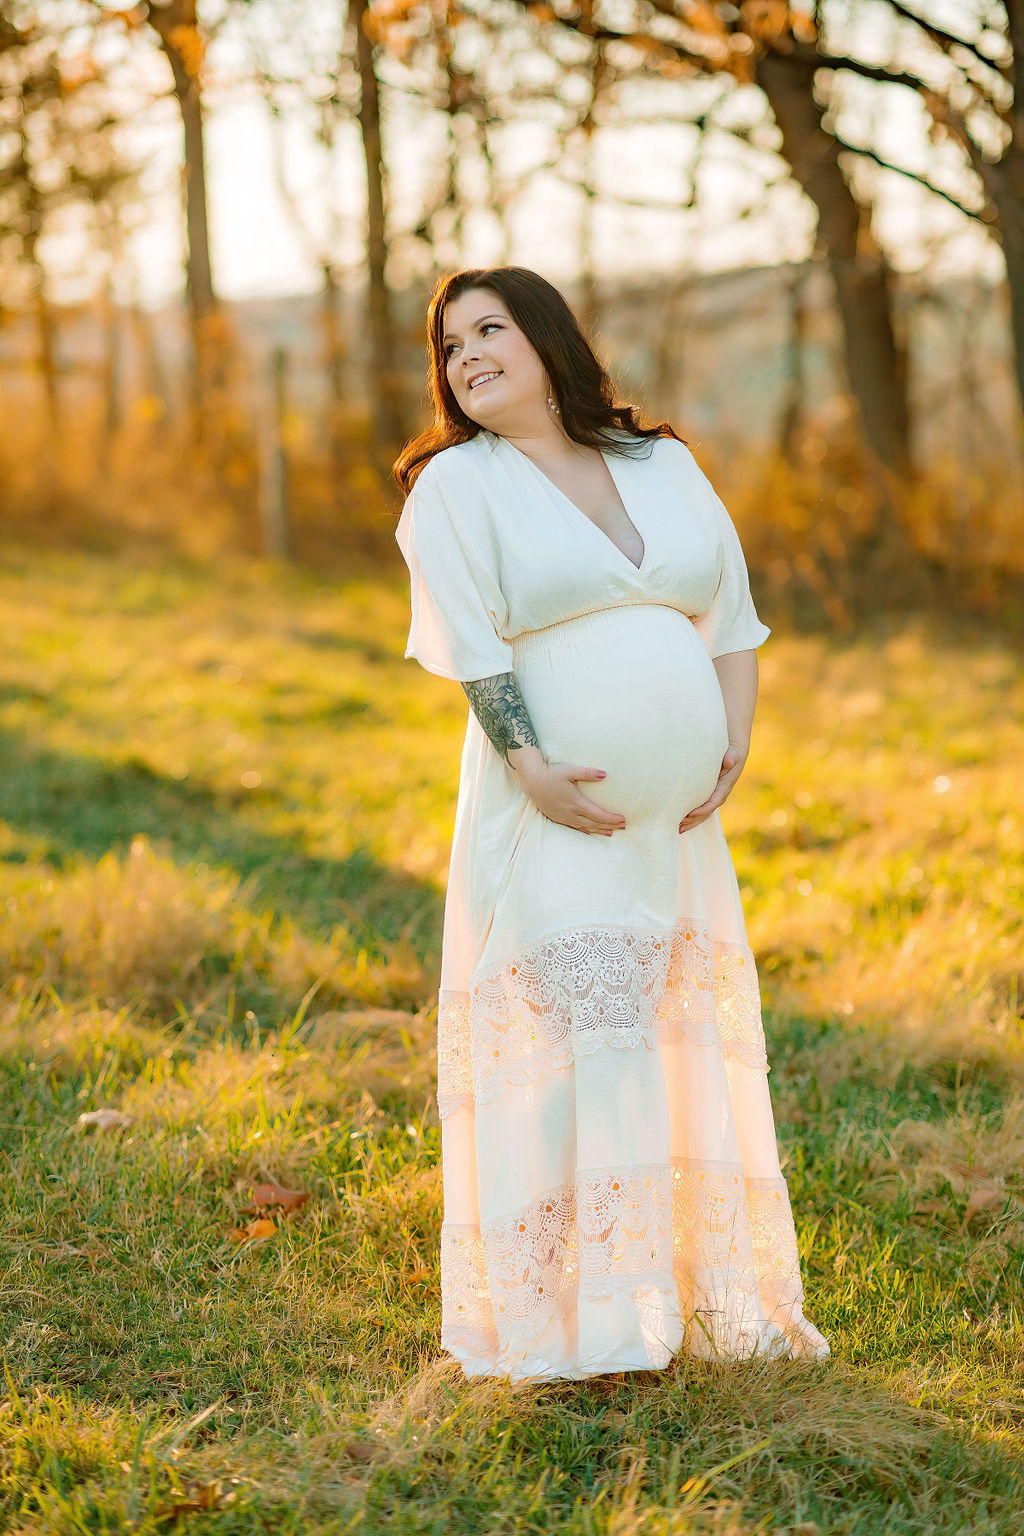 A mother to be looks over her shoulder while holding her bump in a white dress